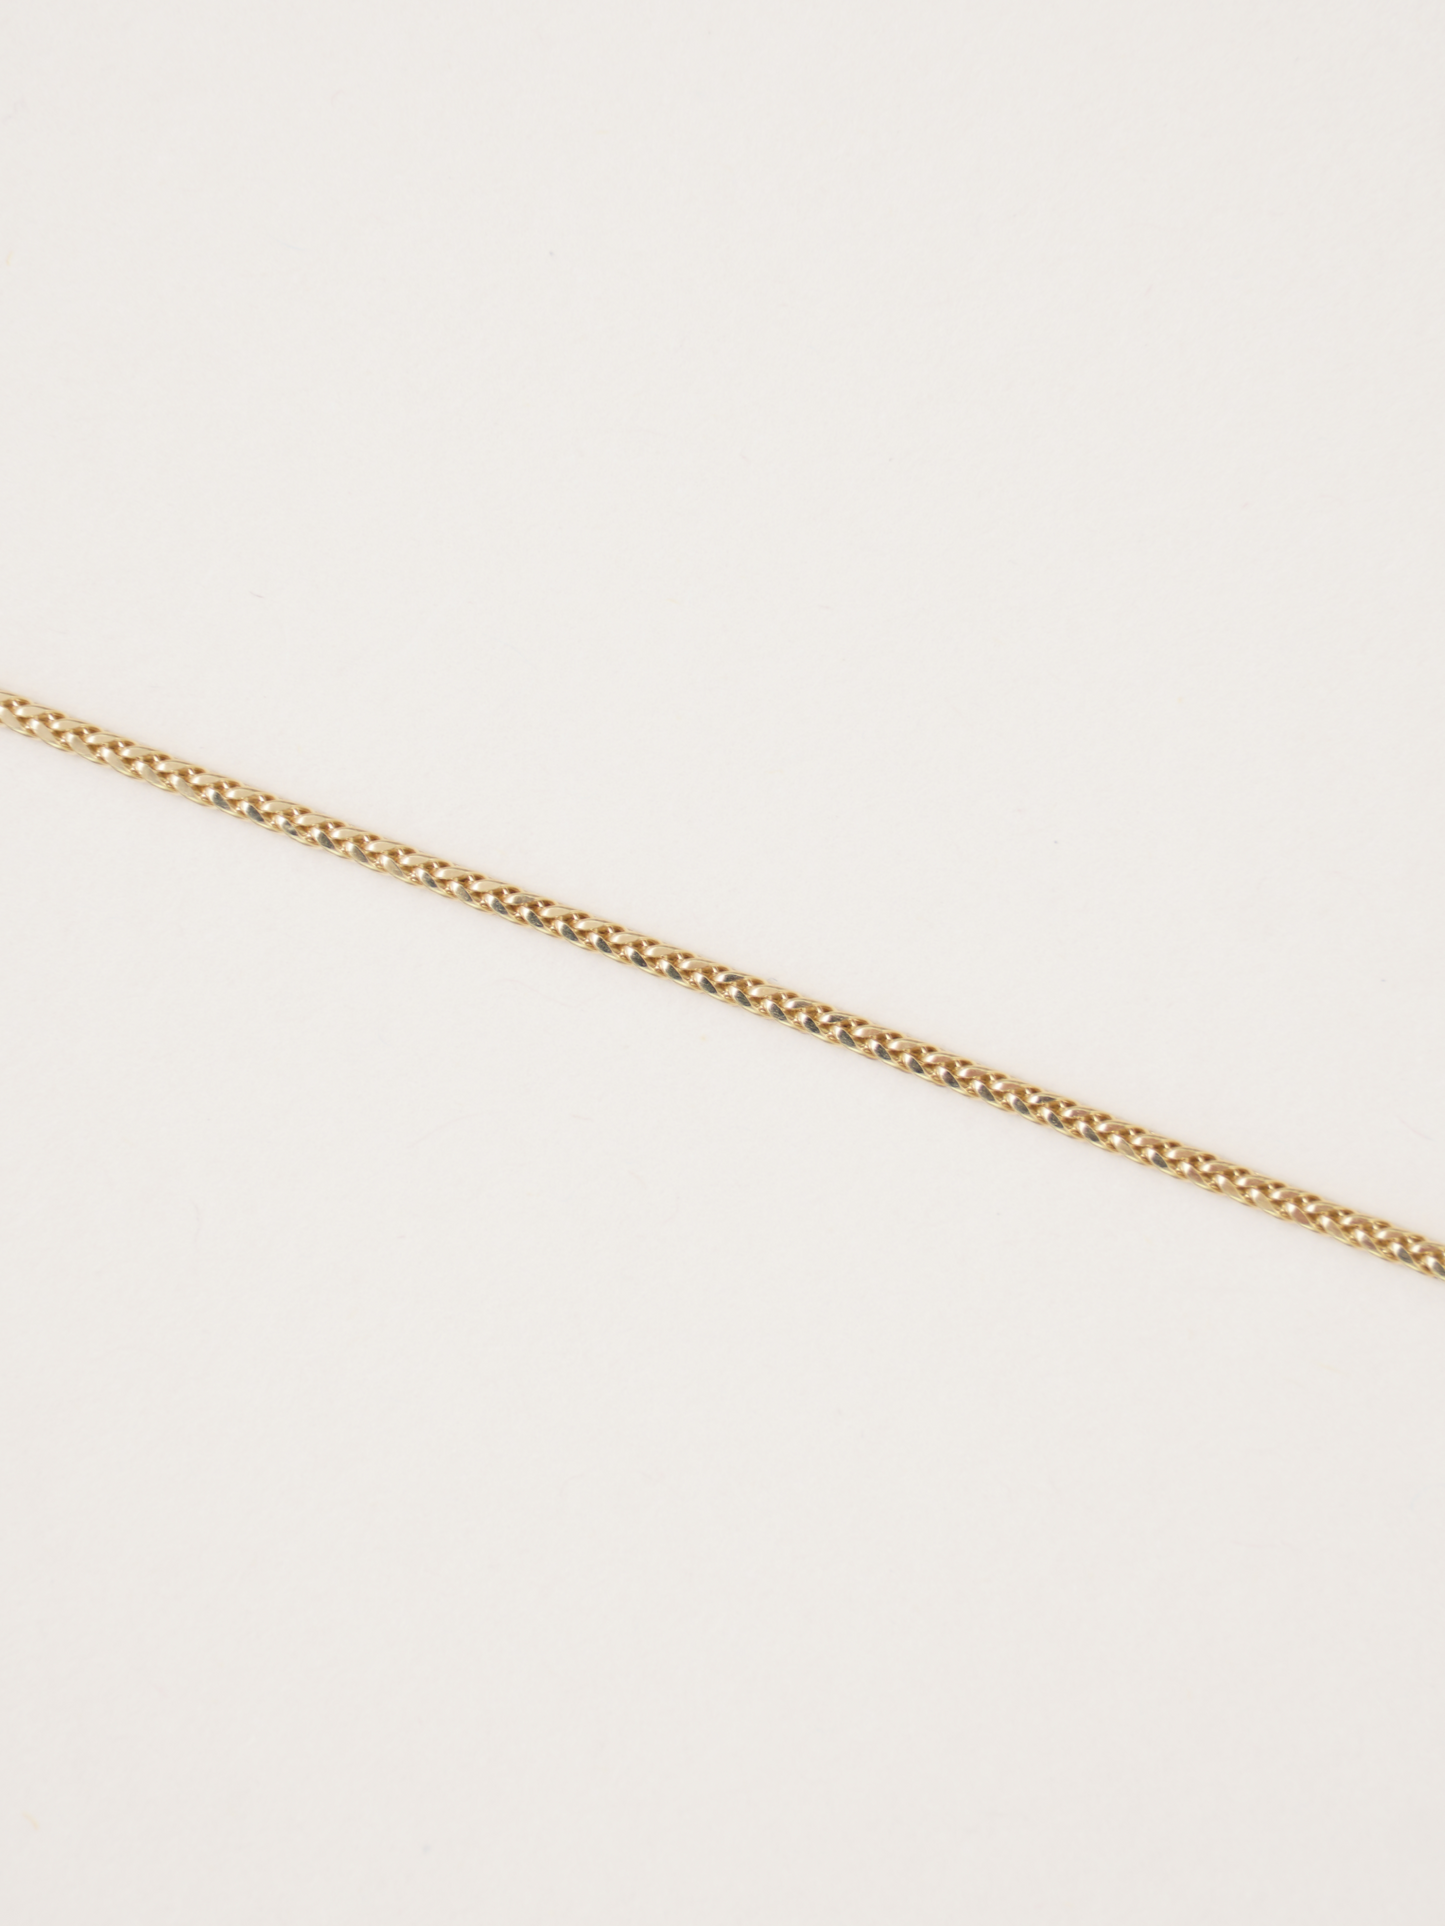 22" Weath x Light Necklace - Yellow Gold